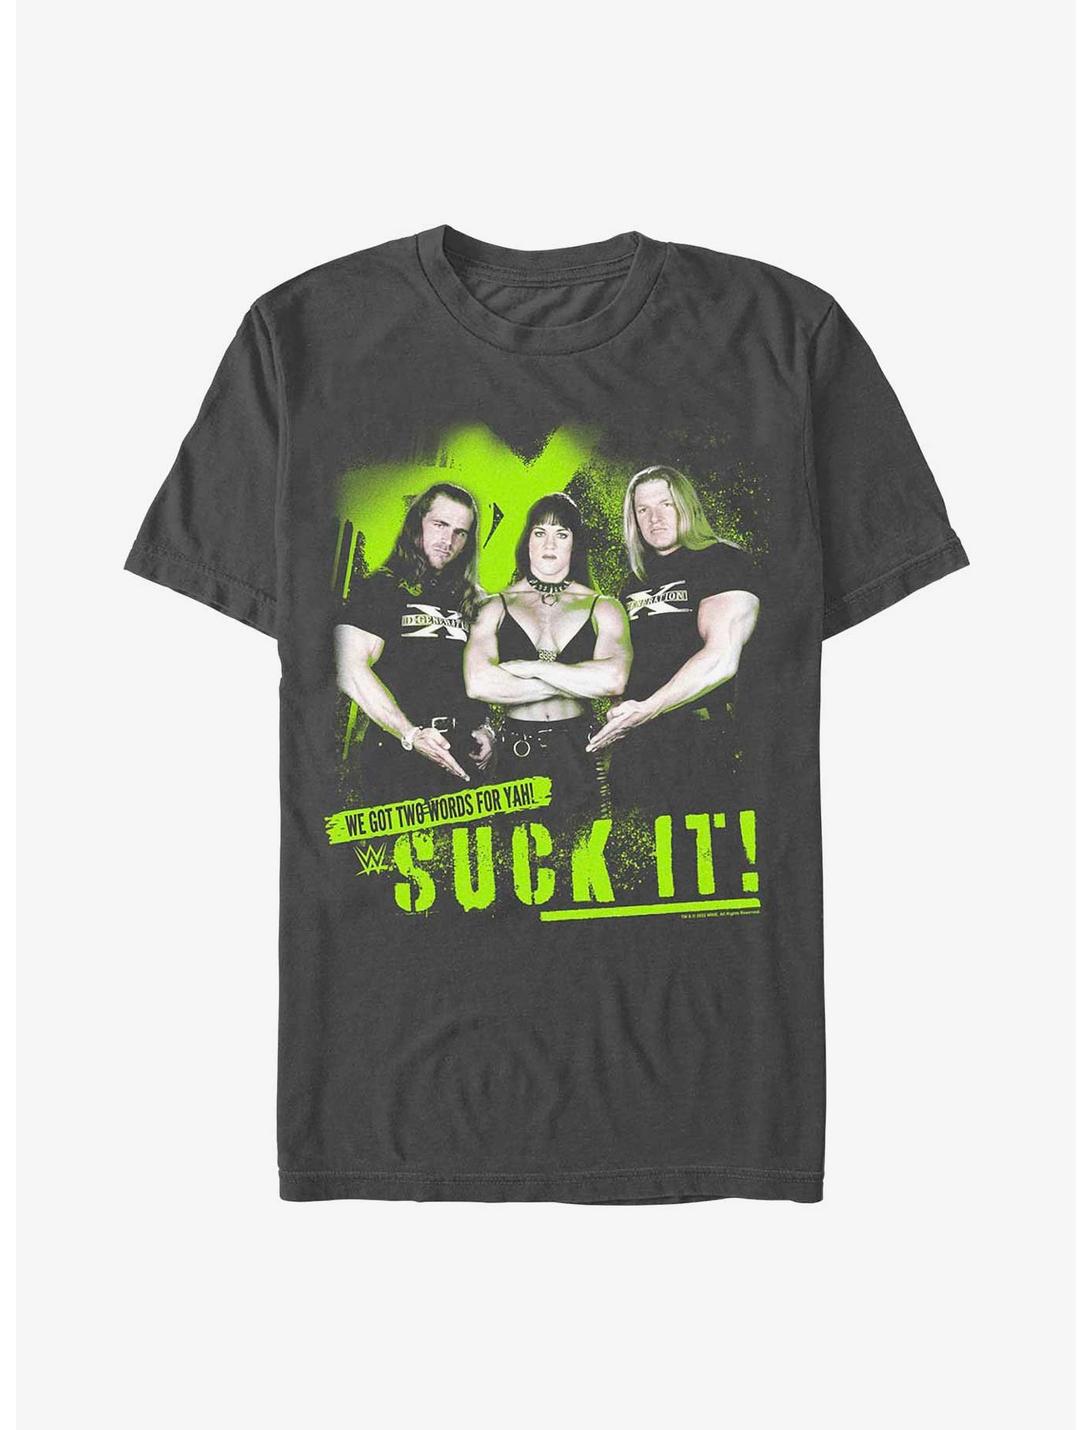 WWE D-Generation X Two Words For Yah! T-Shirt, CHARCOAL, hi-res